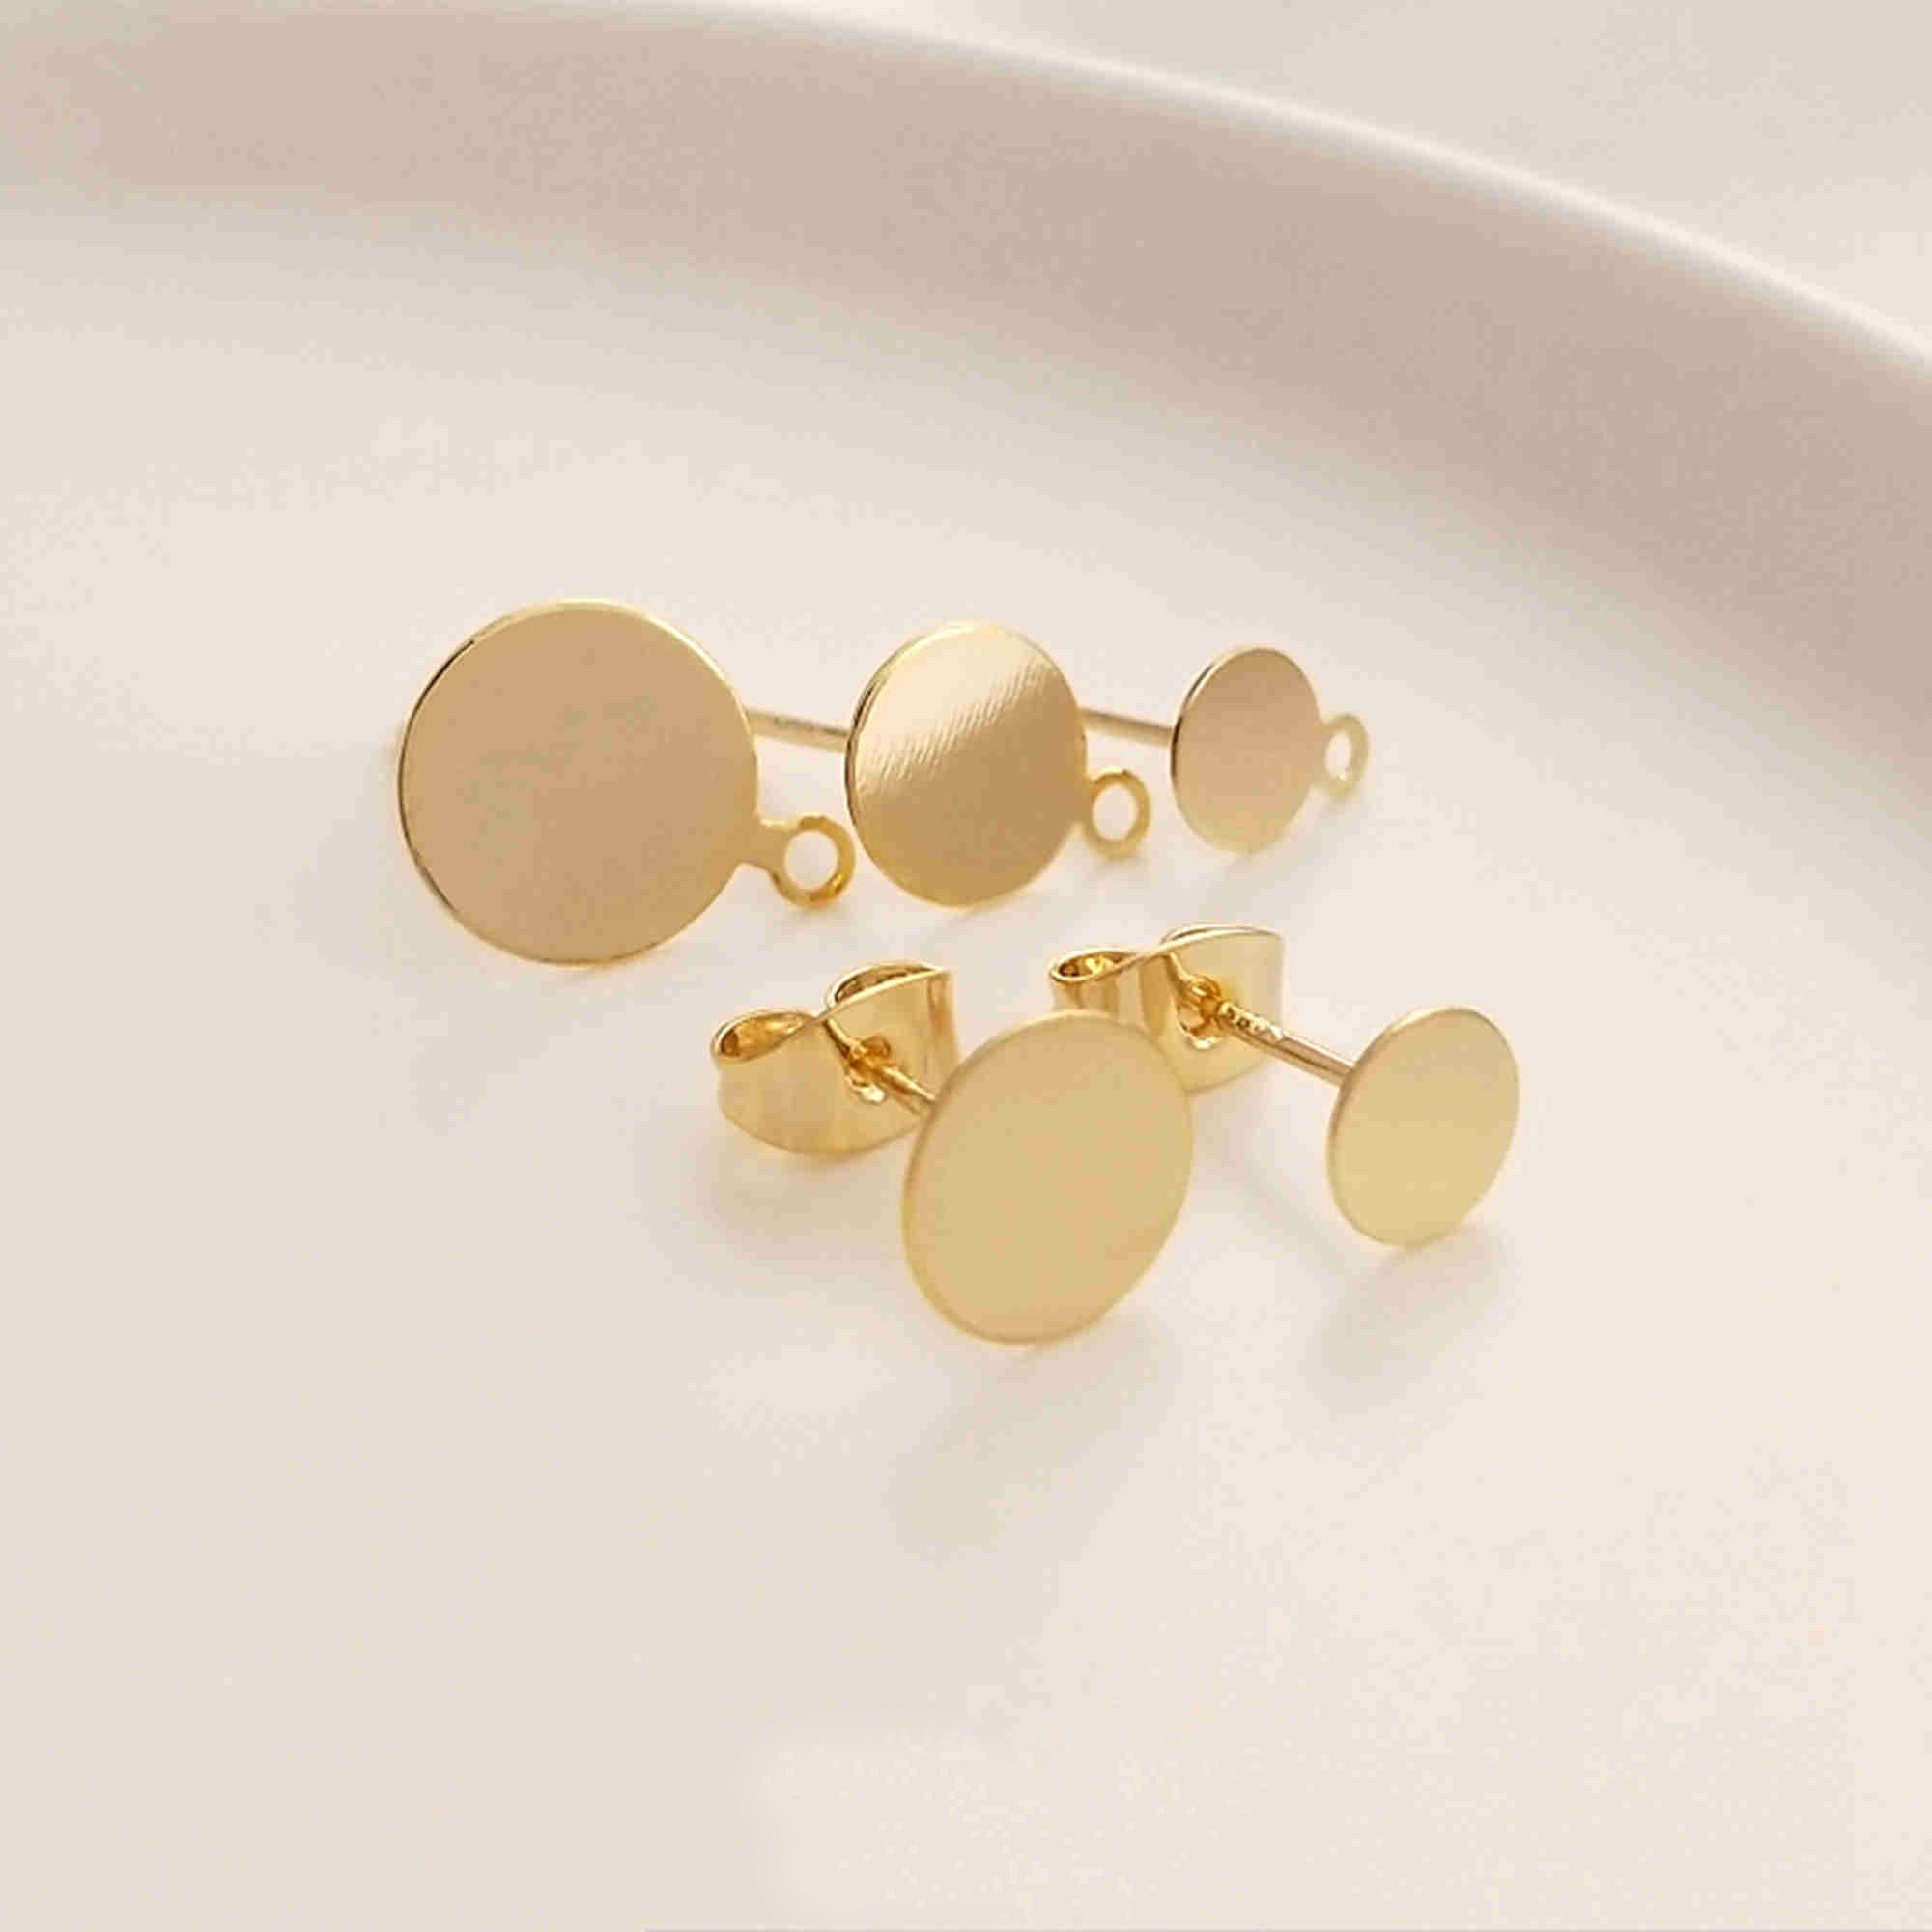 30x KC Gold Flat Back Blank Earring Studs With Loop, 6mm/8mm/10mm/12mm  Steel Champagne Gold Flat Pad Earring Posts & Rubber Backs F158 